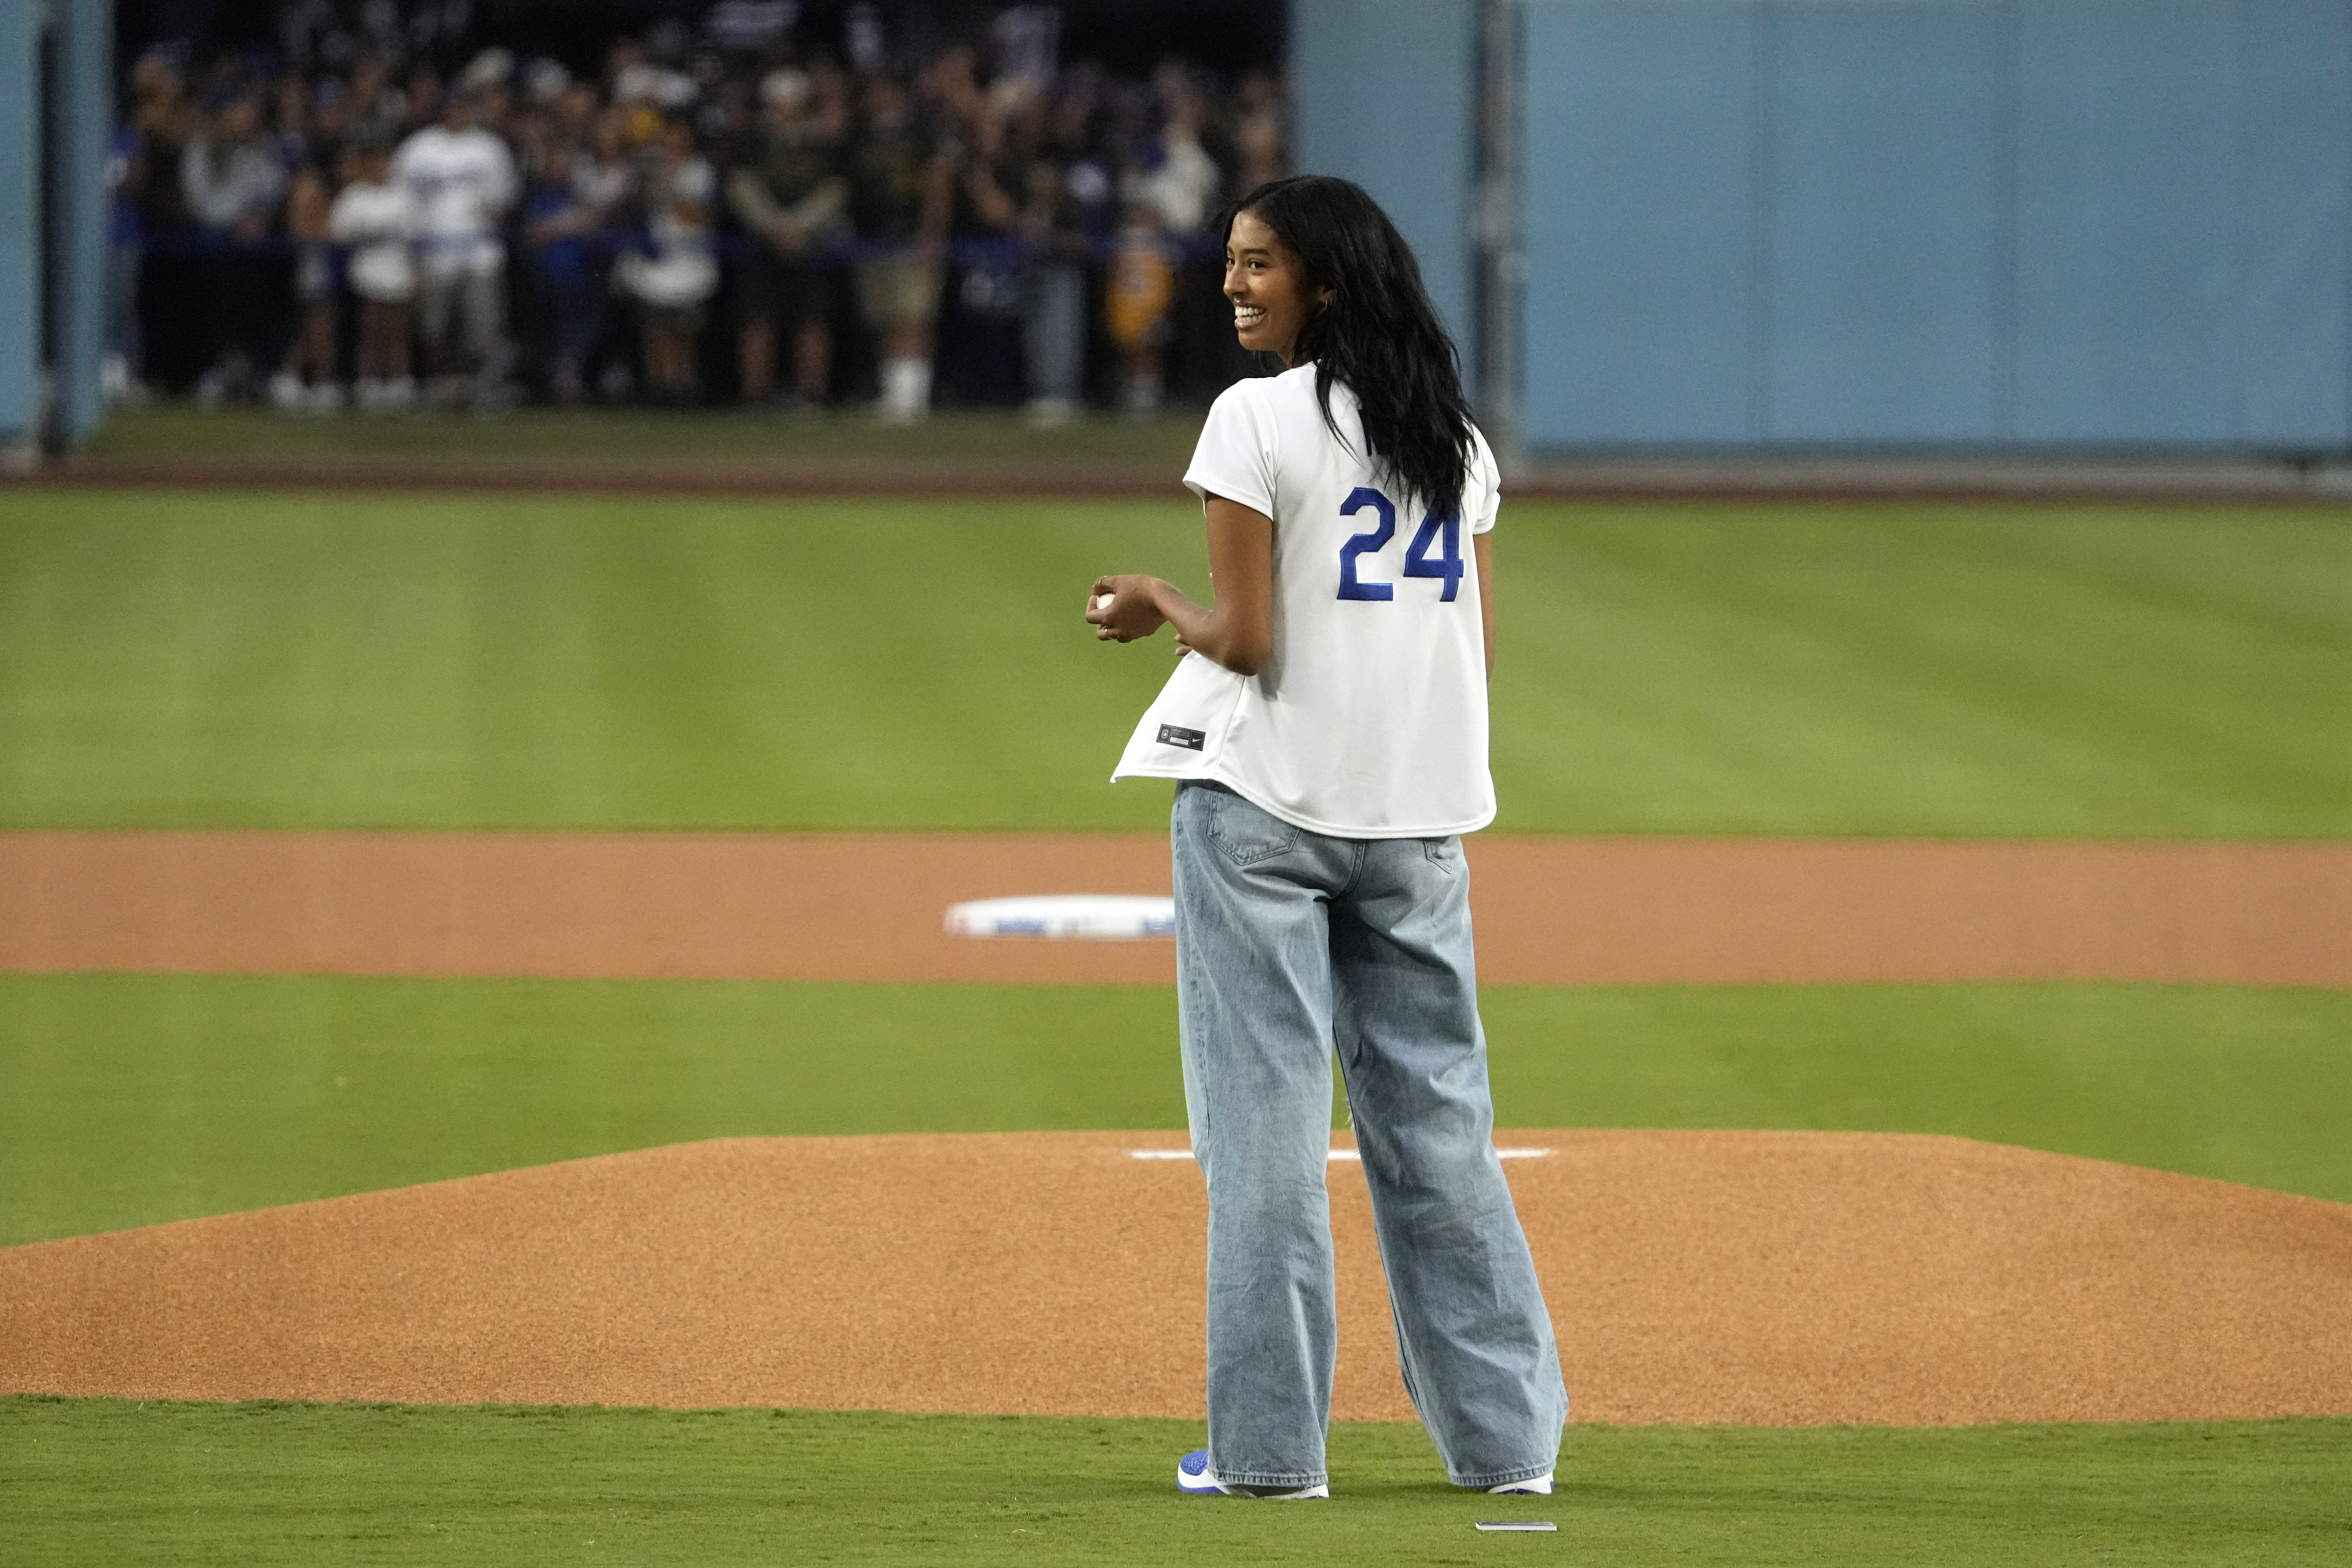 Kobe Bryant's daughter Natalia impresses Mookie Betts with first pitch